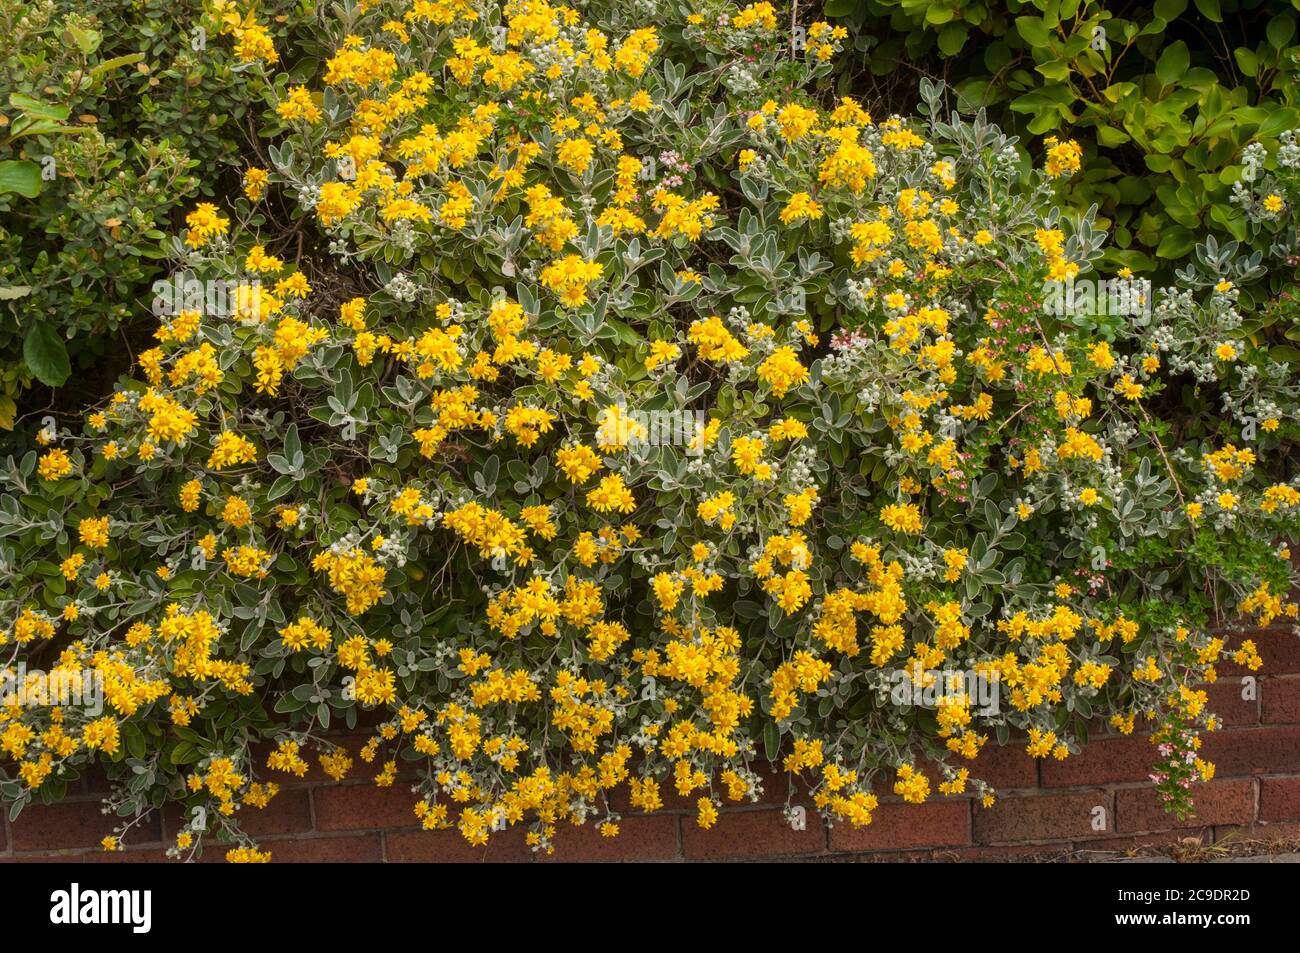 Brachyglottis Sunshine used to be called Senecio An evergreen perennial shrub that has yellow flowers in early to mid summer and is fully hardy Stock Photo